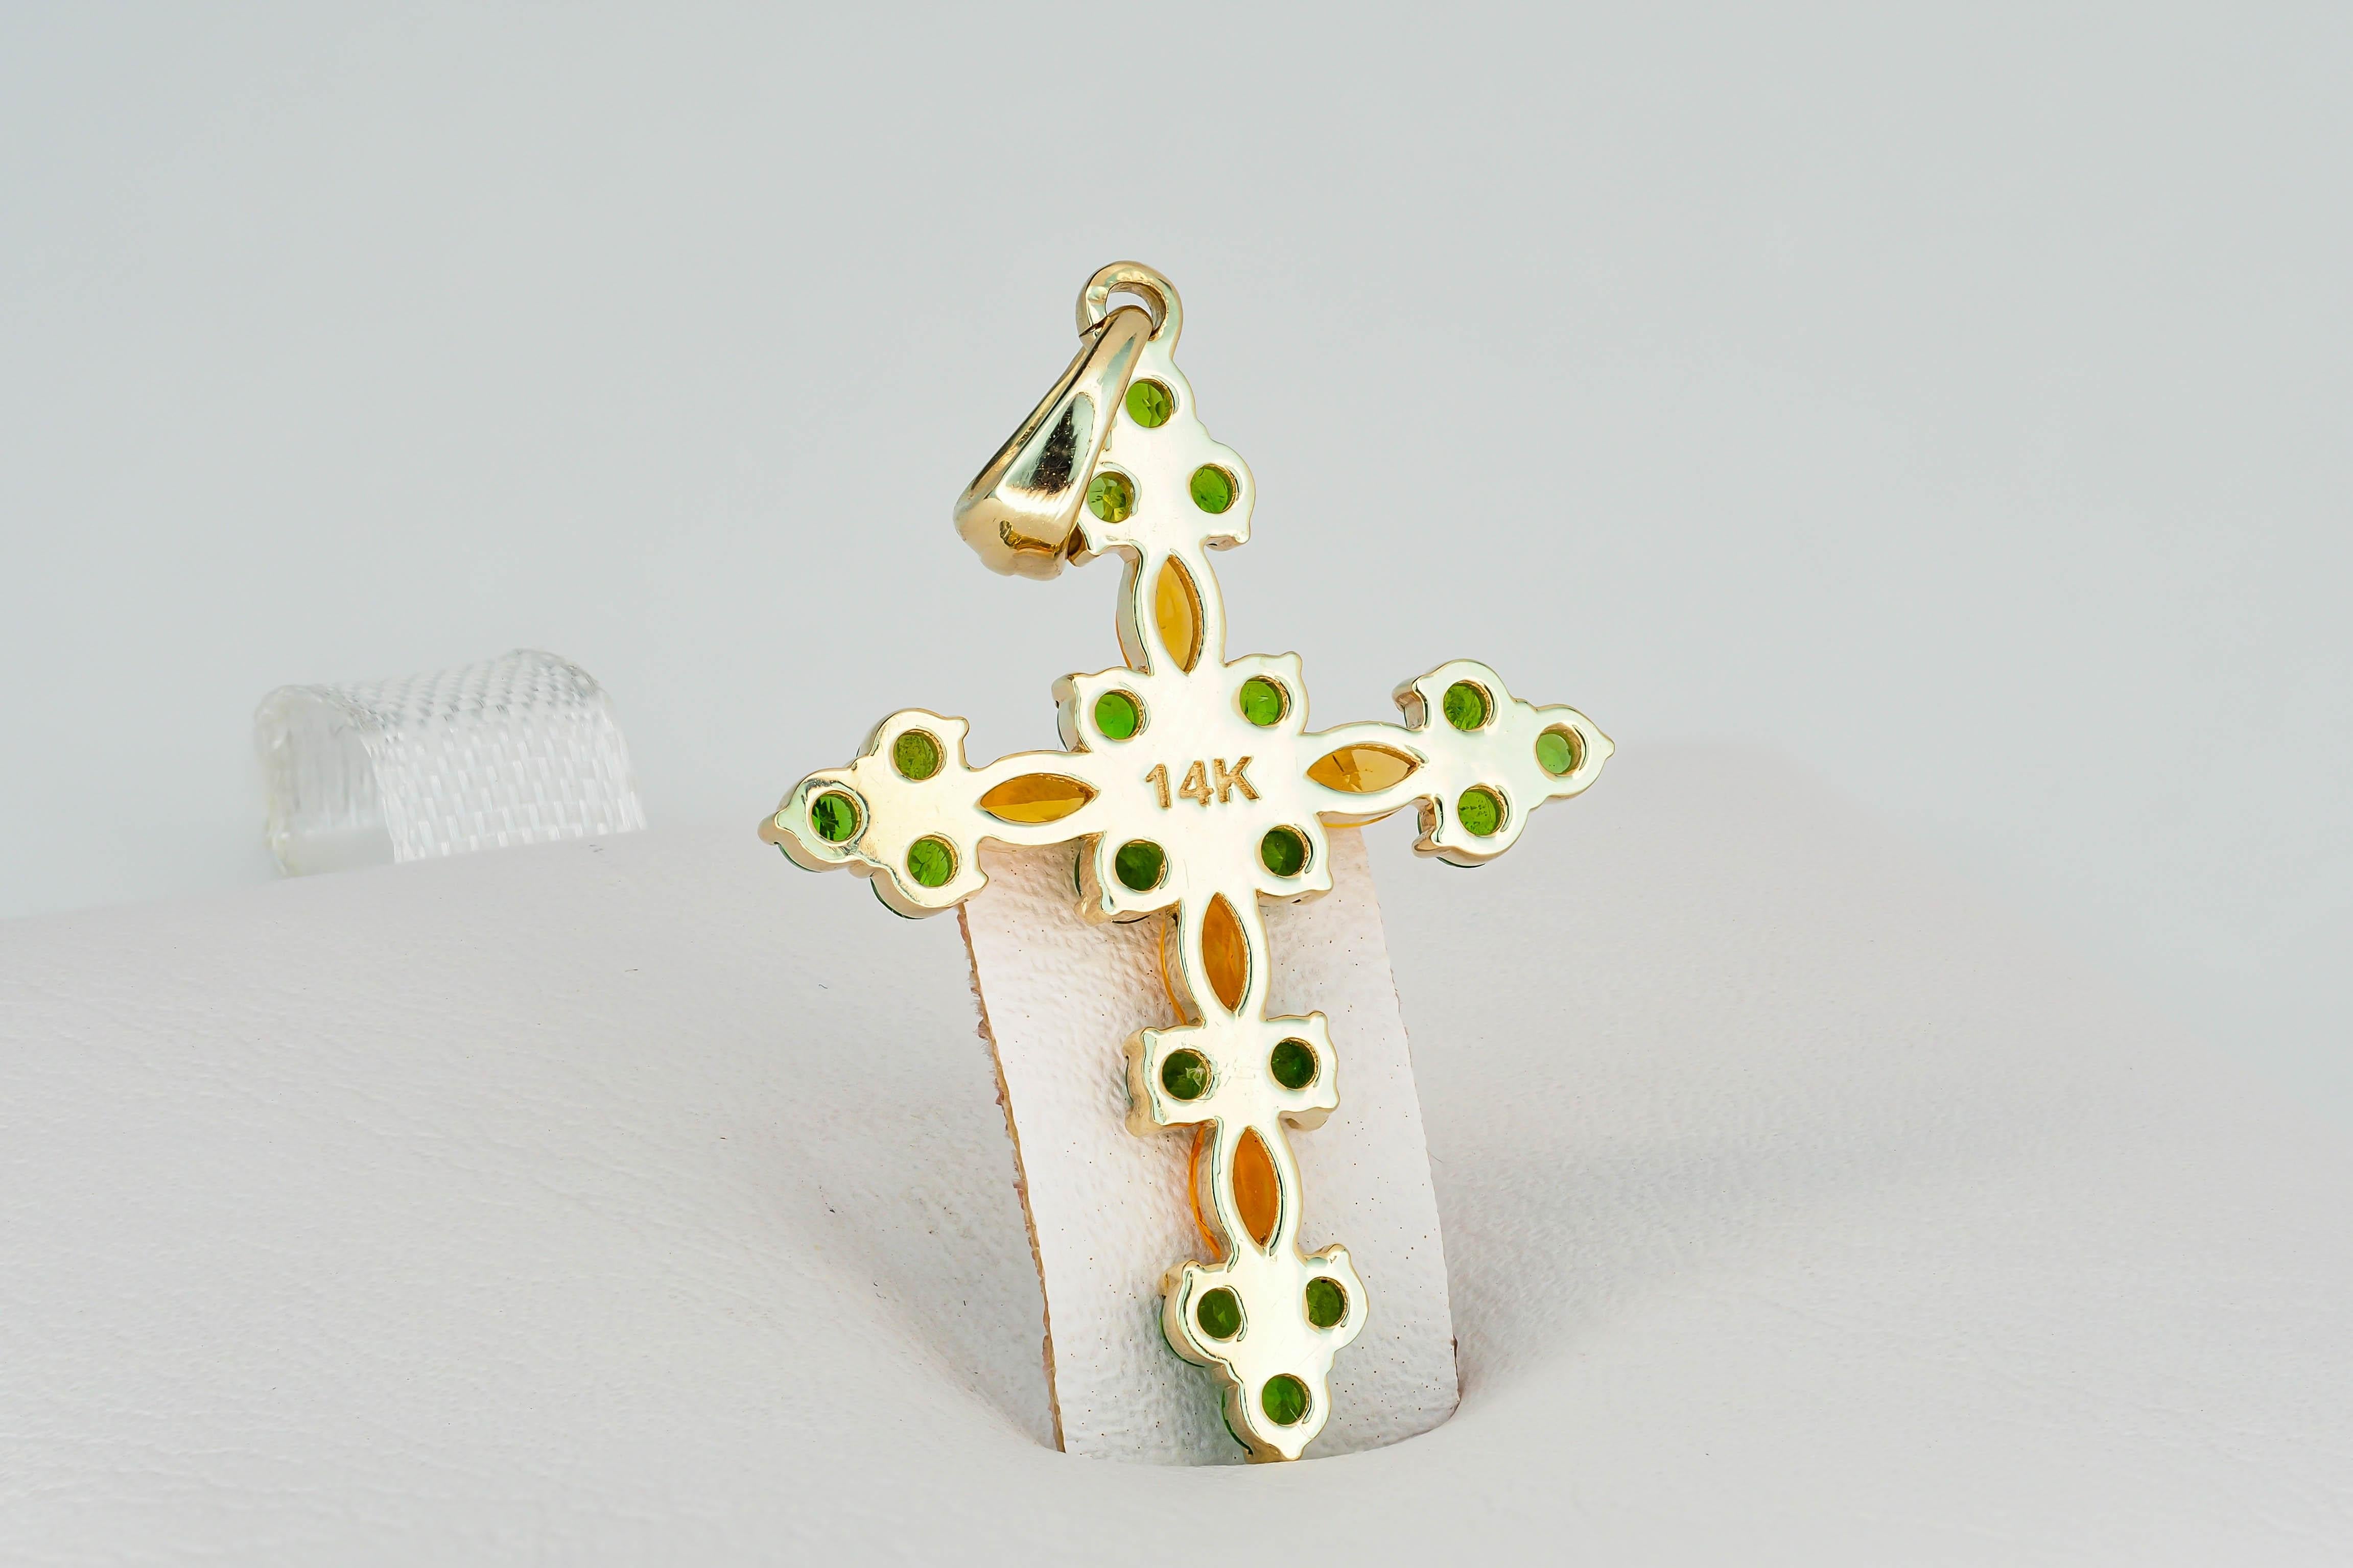 14k Gold Cross Pendant with Colored Stones Fire Opals and Tsavorites For Sale 1